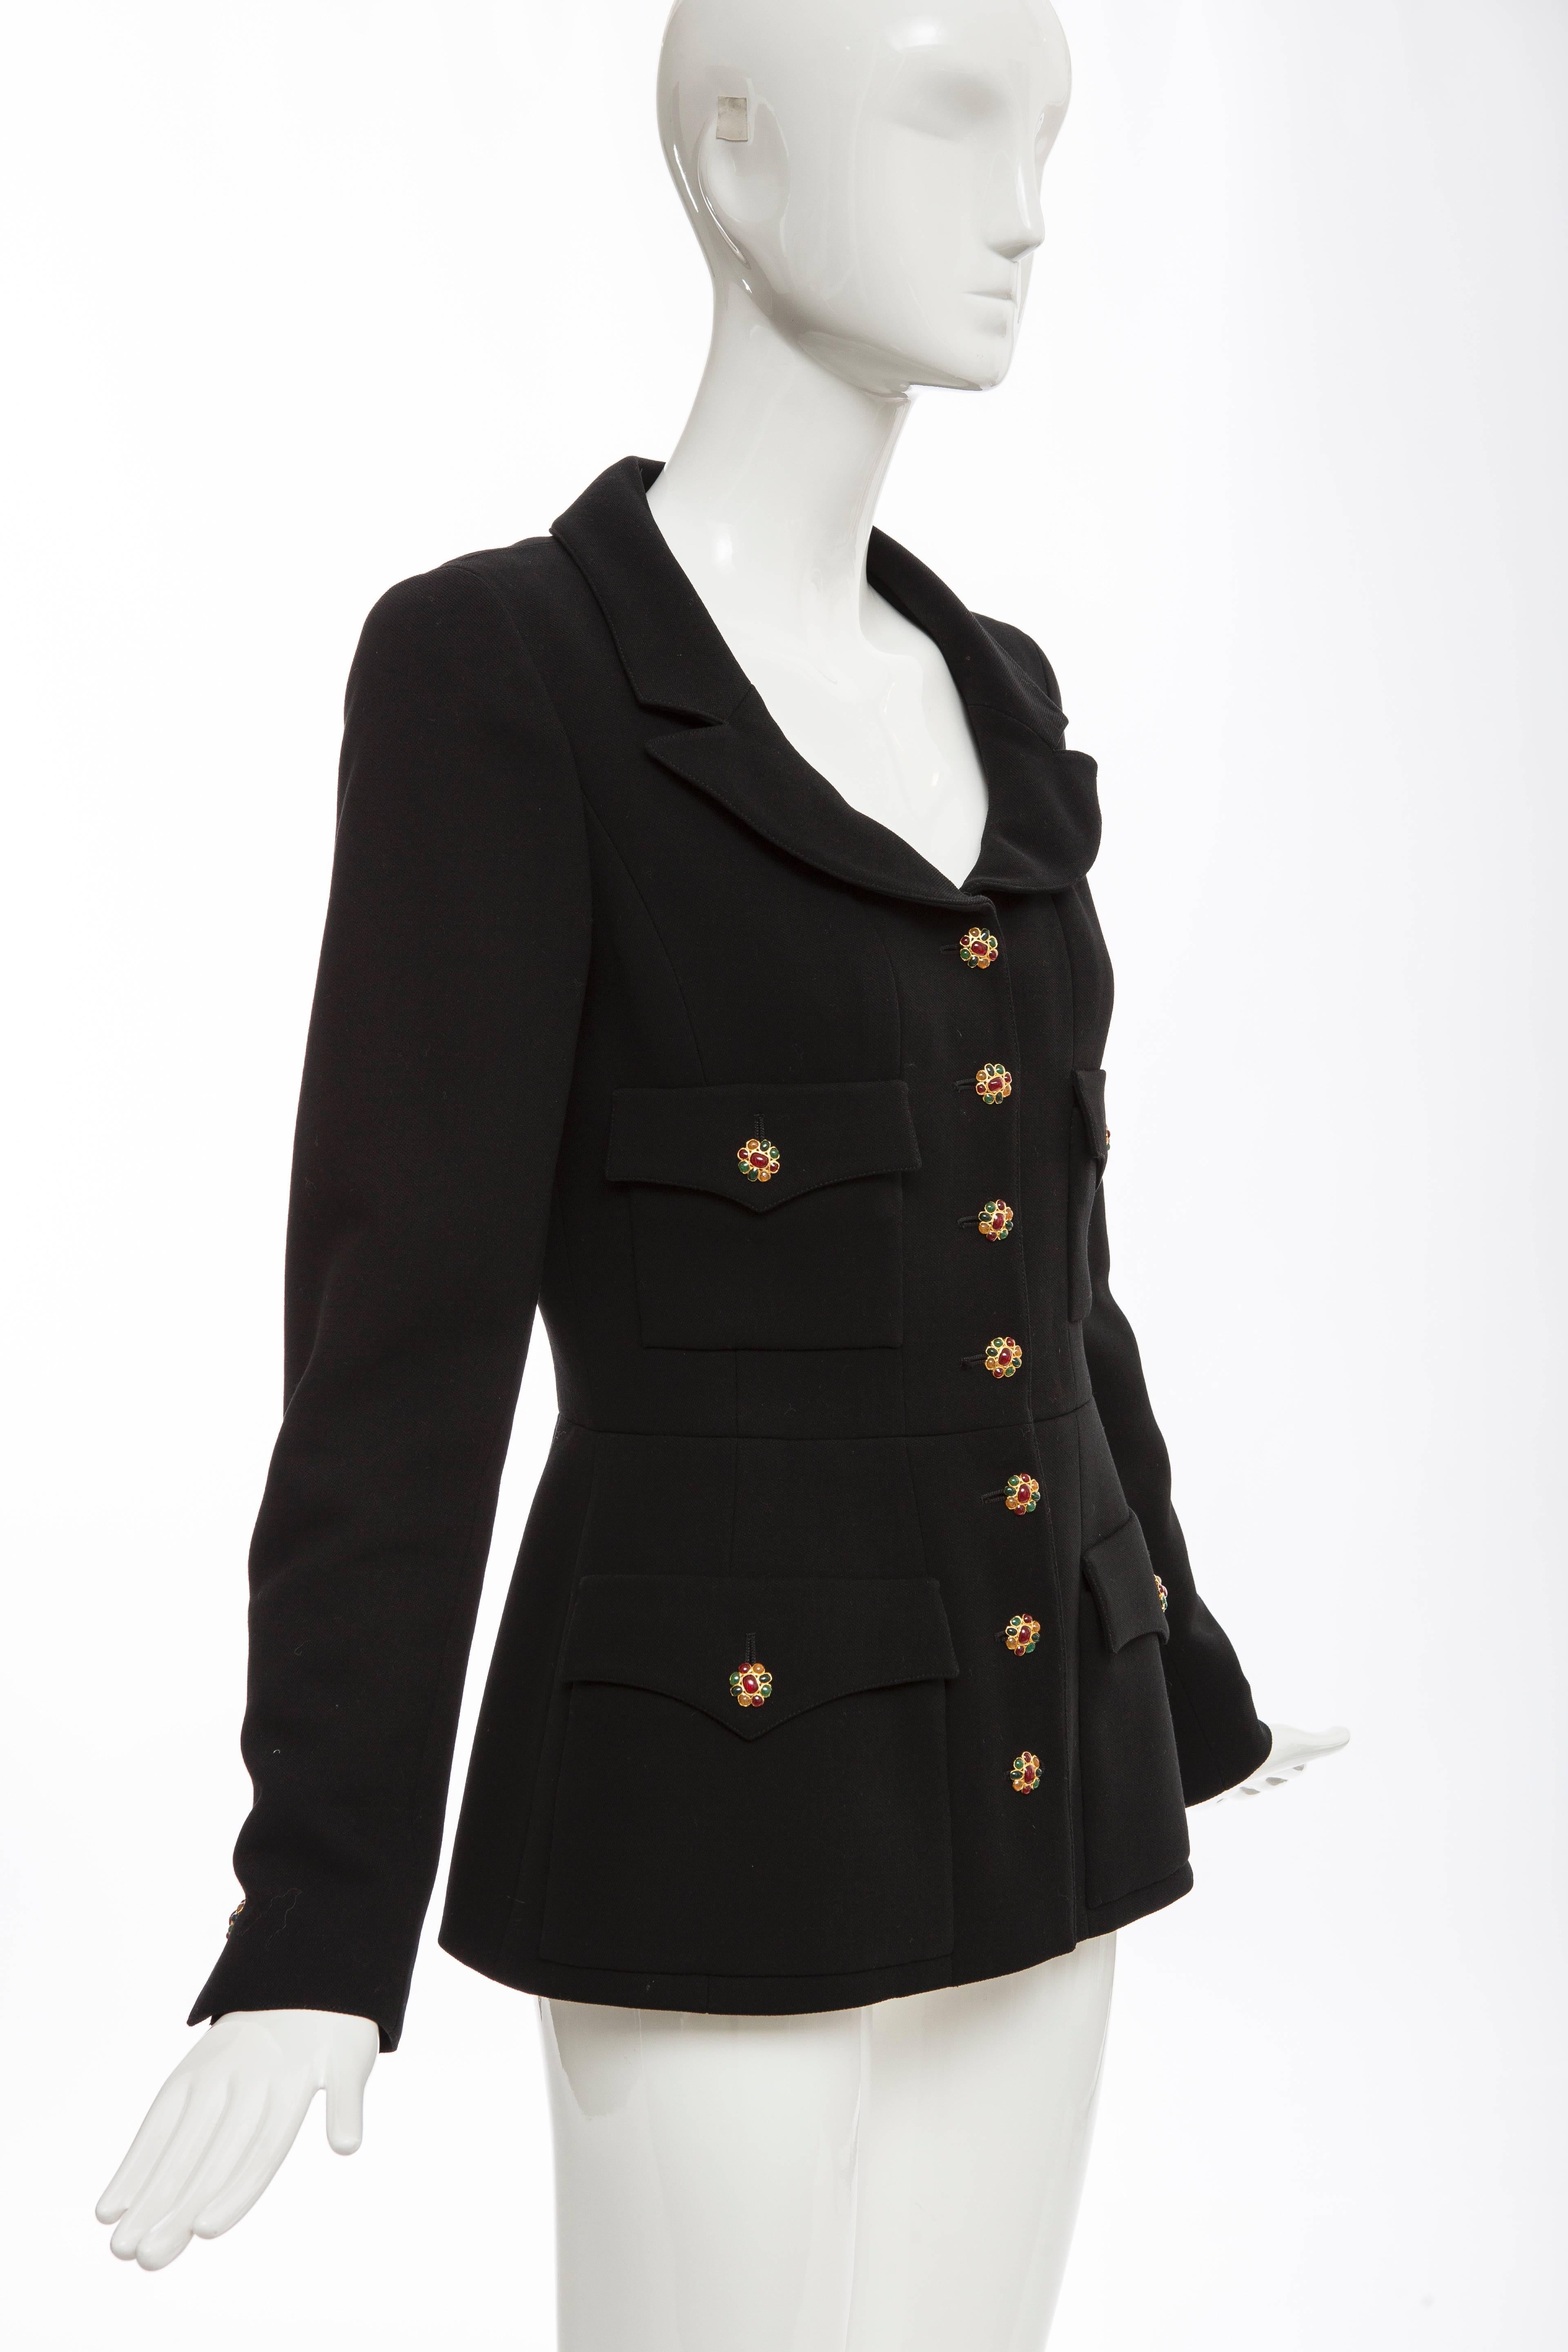 Women's Chanel Black Wool Jacket With Gripoix Buttons, Autumn - Winter 1996